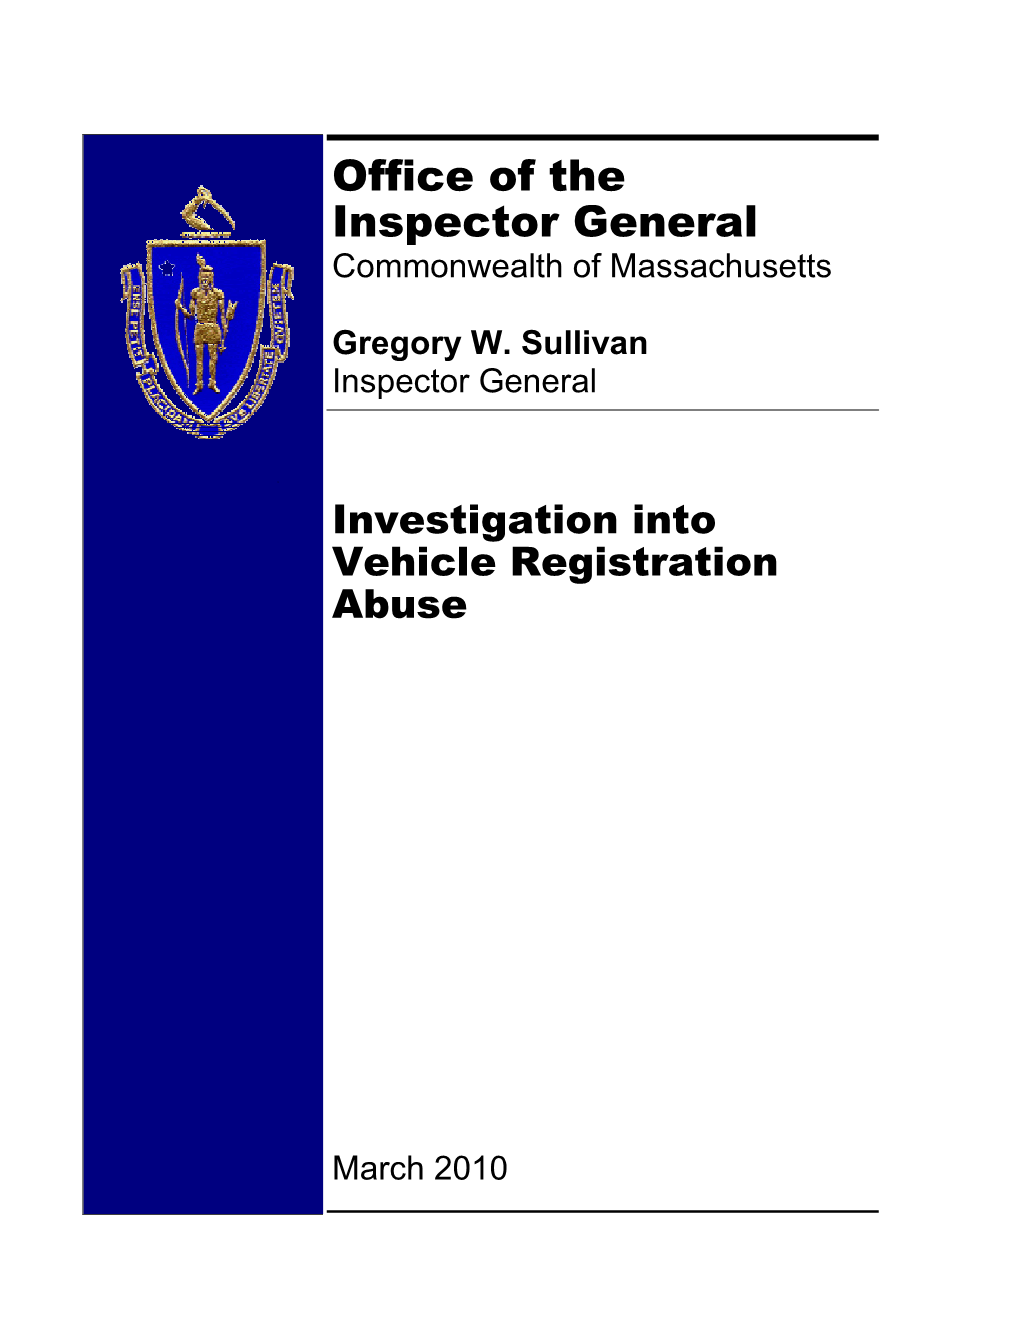 Investigation Into Vehicle Registration Abuse, March 2010